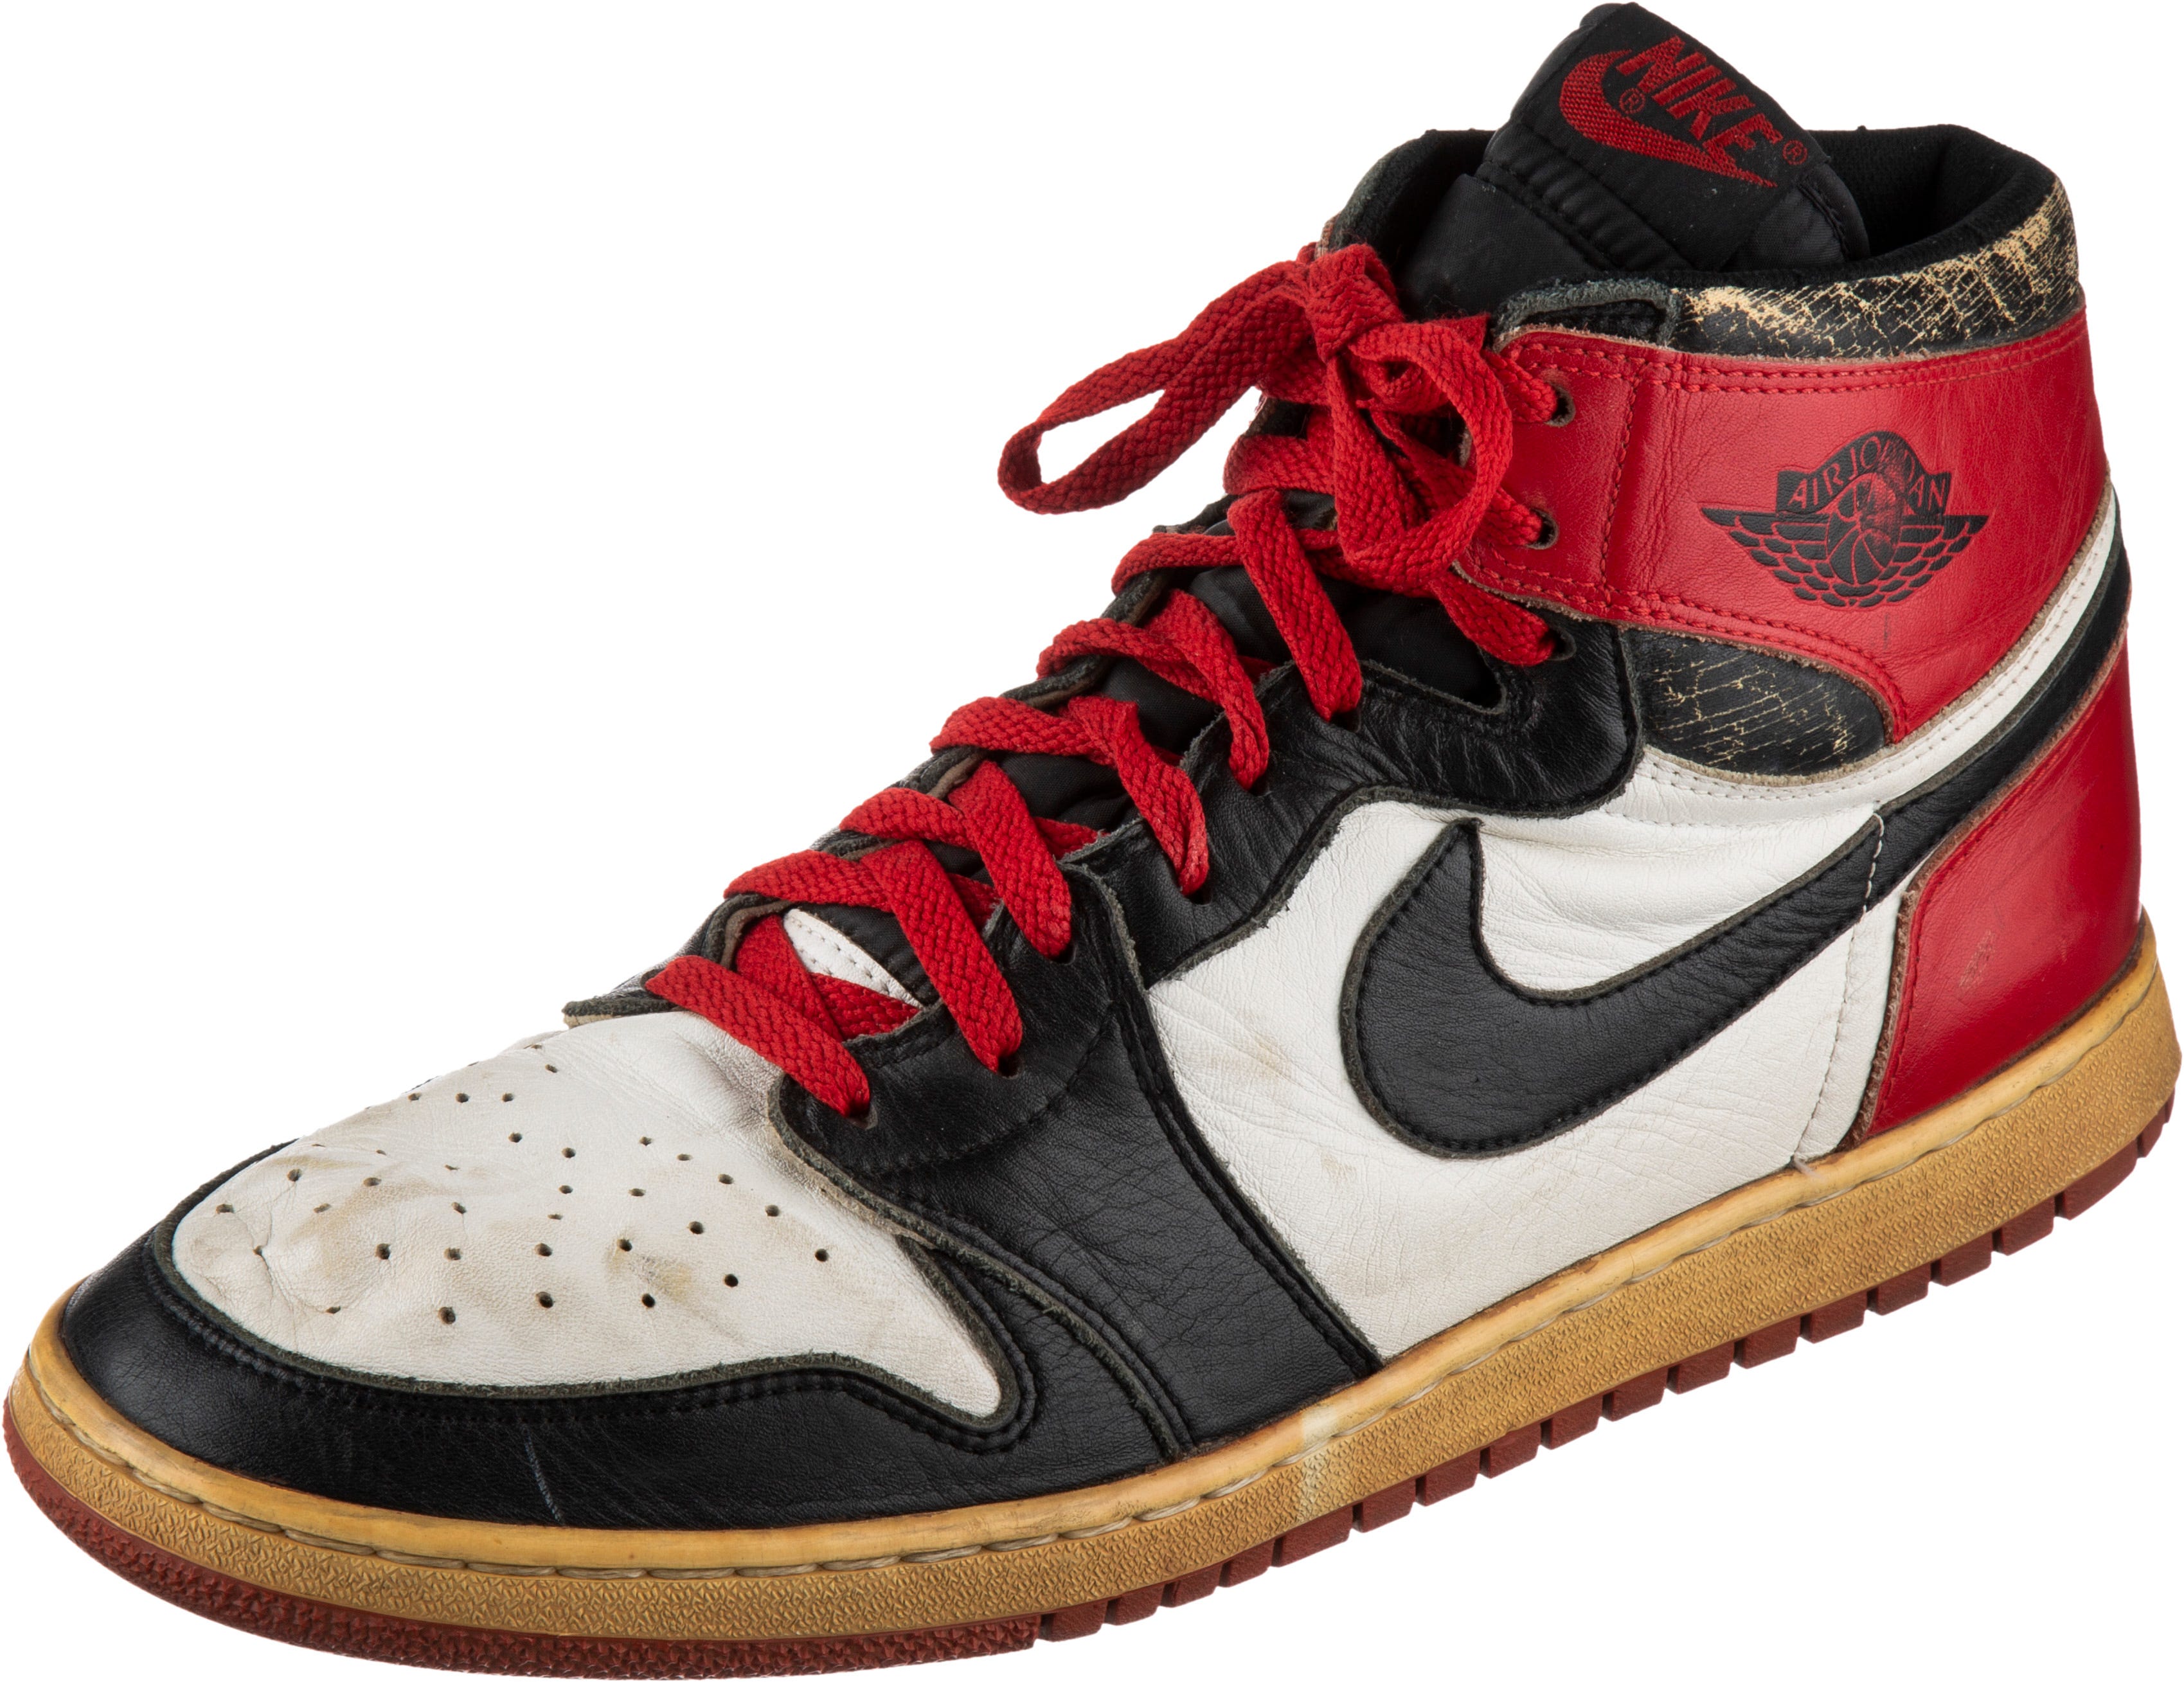 Most significant Air Jordan shoe' saved from crumbling Milwaukee mall